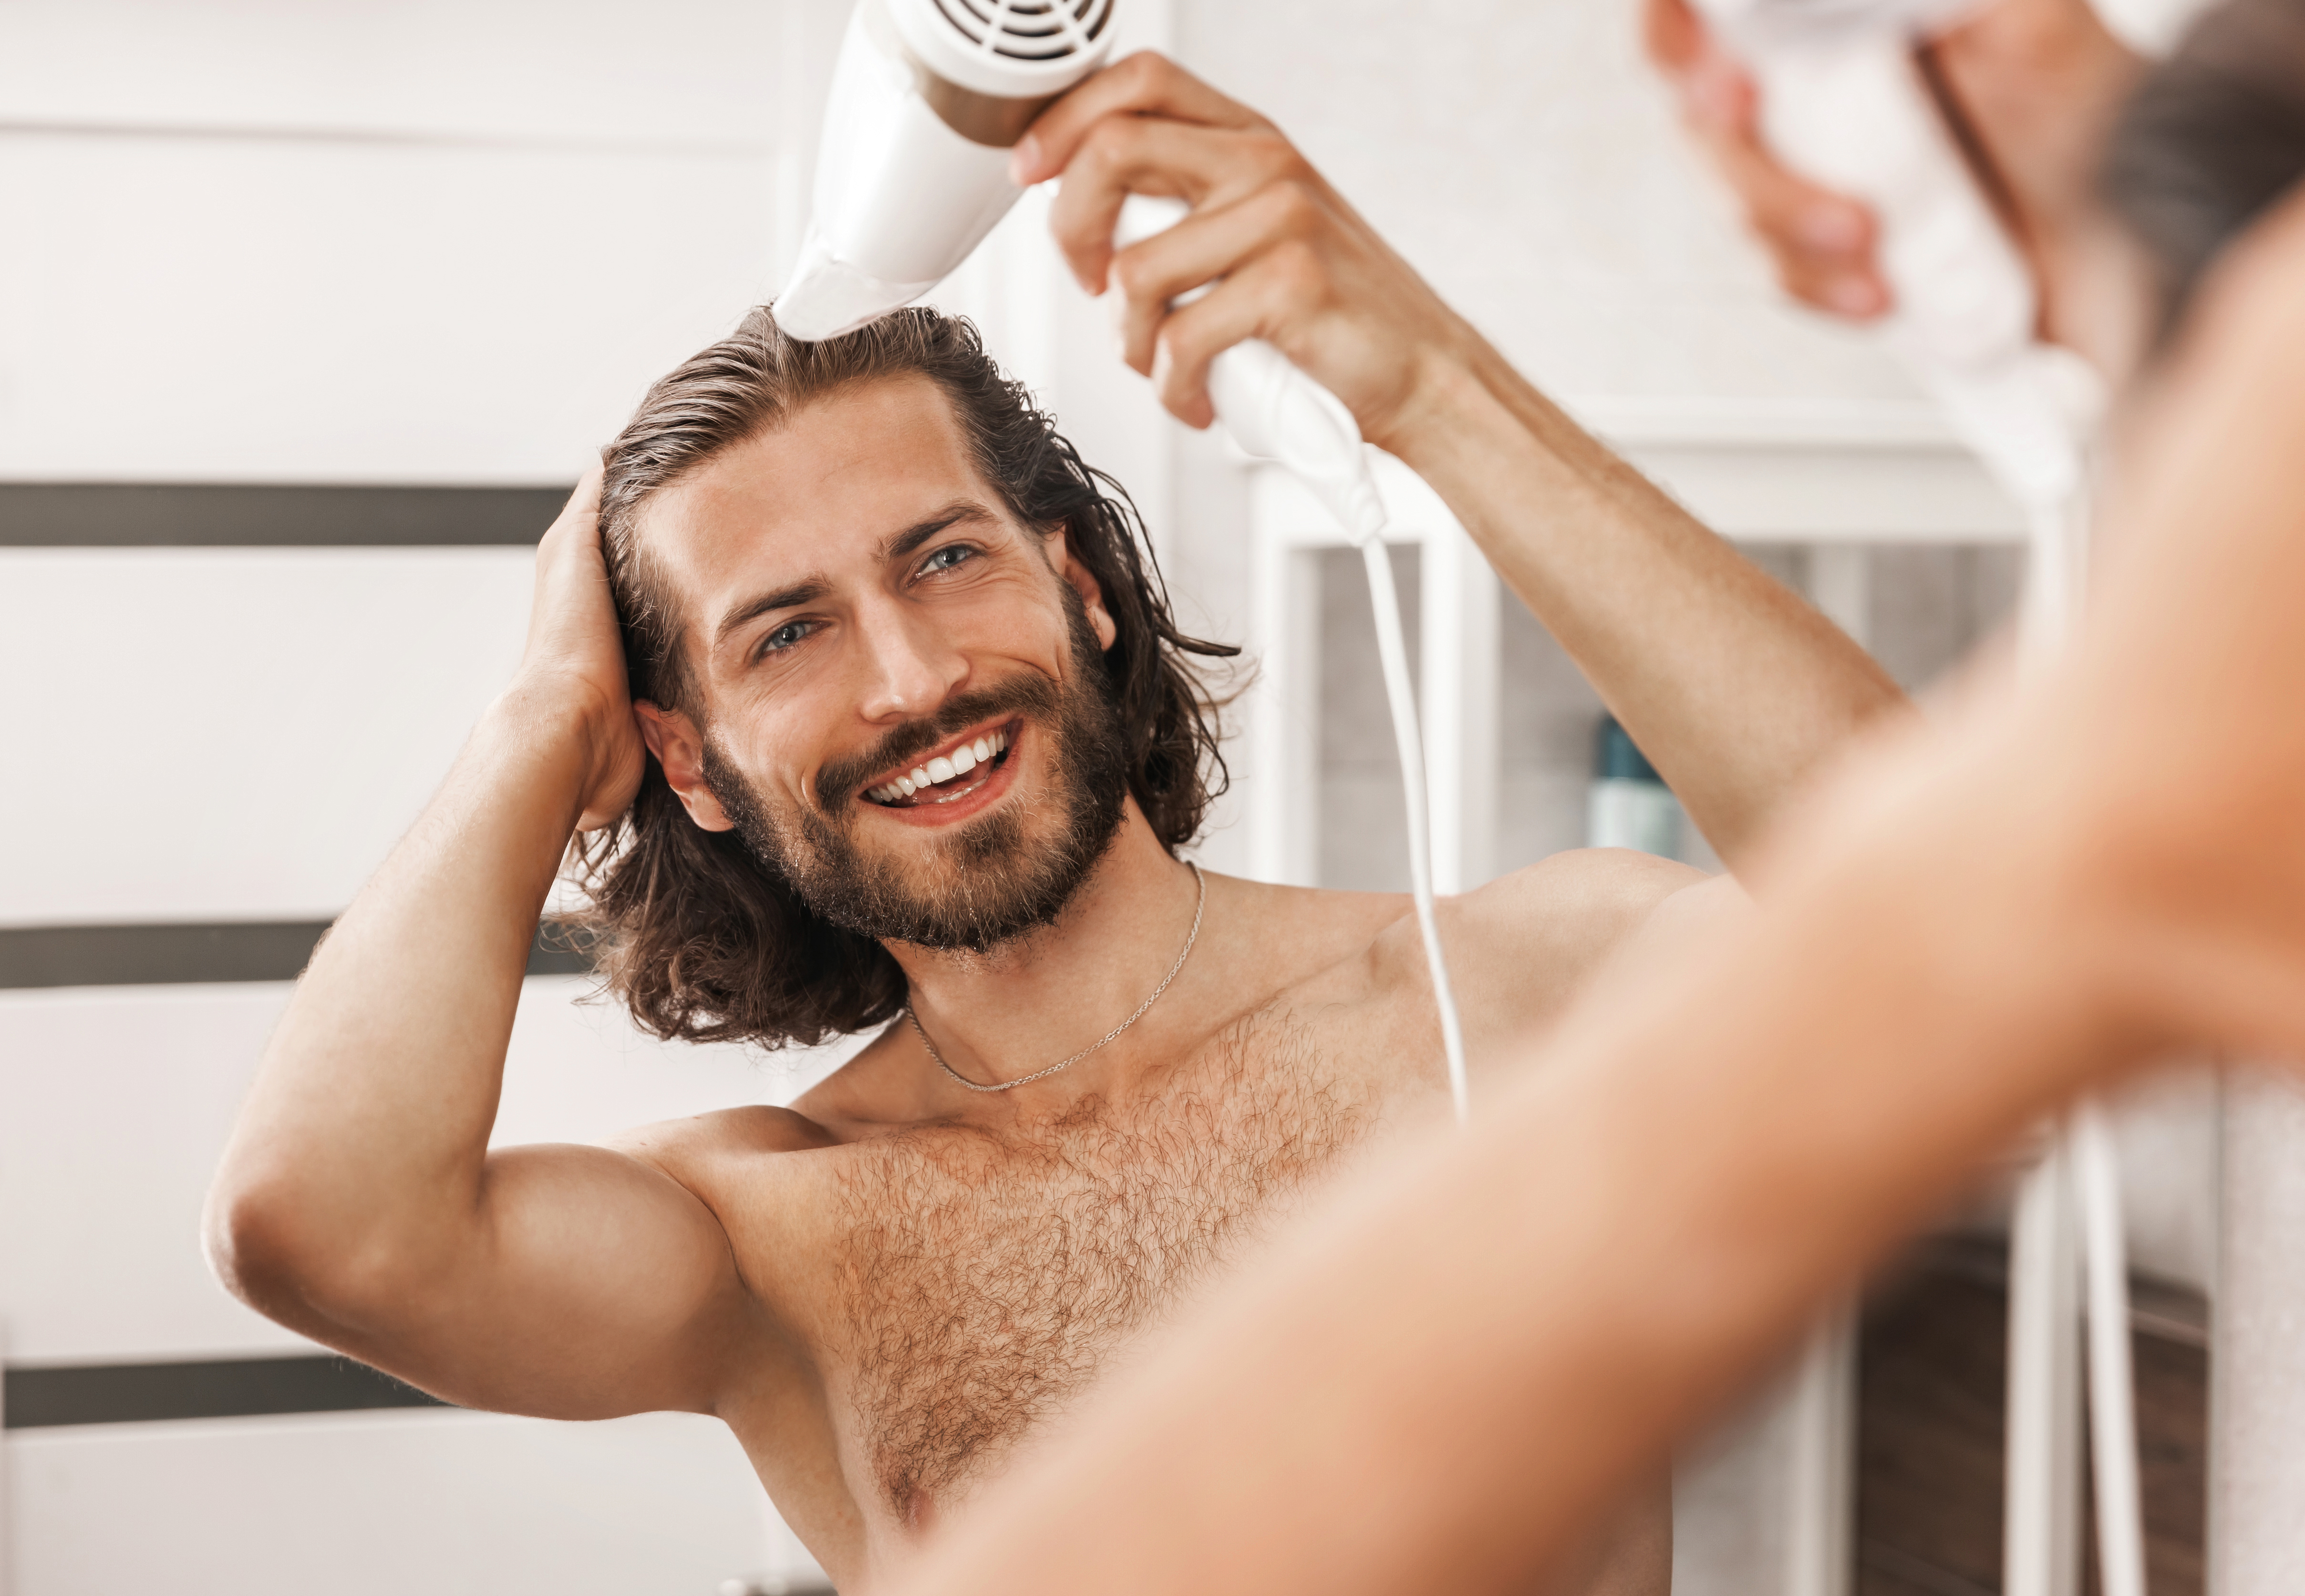 A man using a hair dryer in front of a mirror |Source: Shutterstock